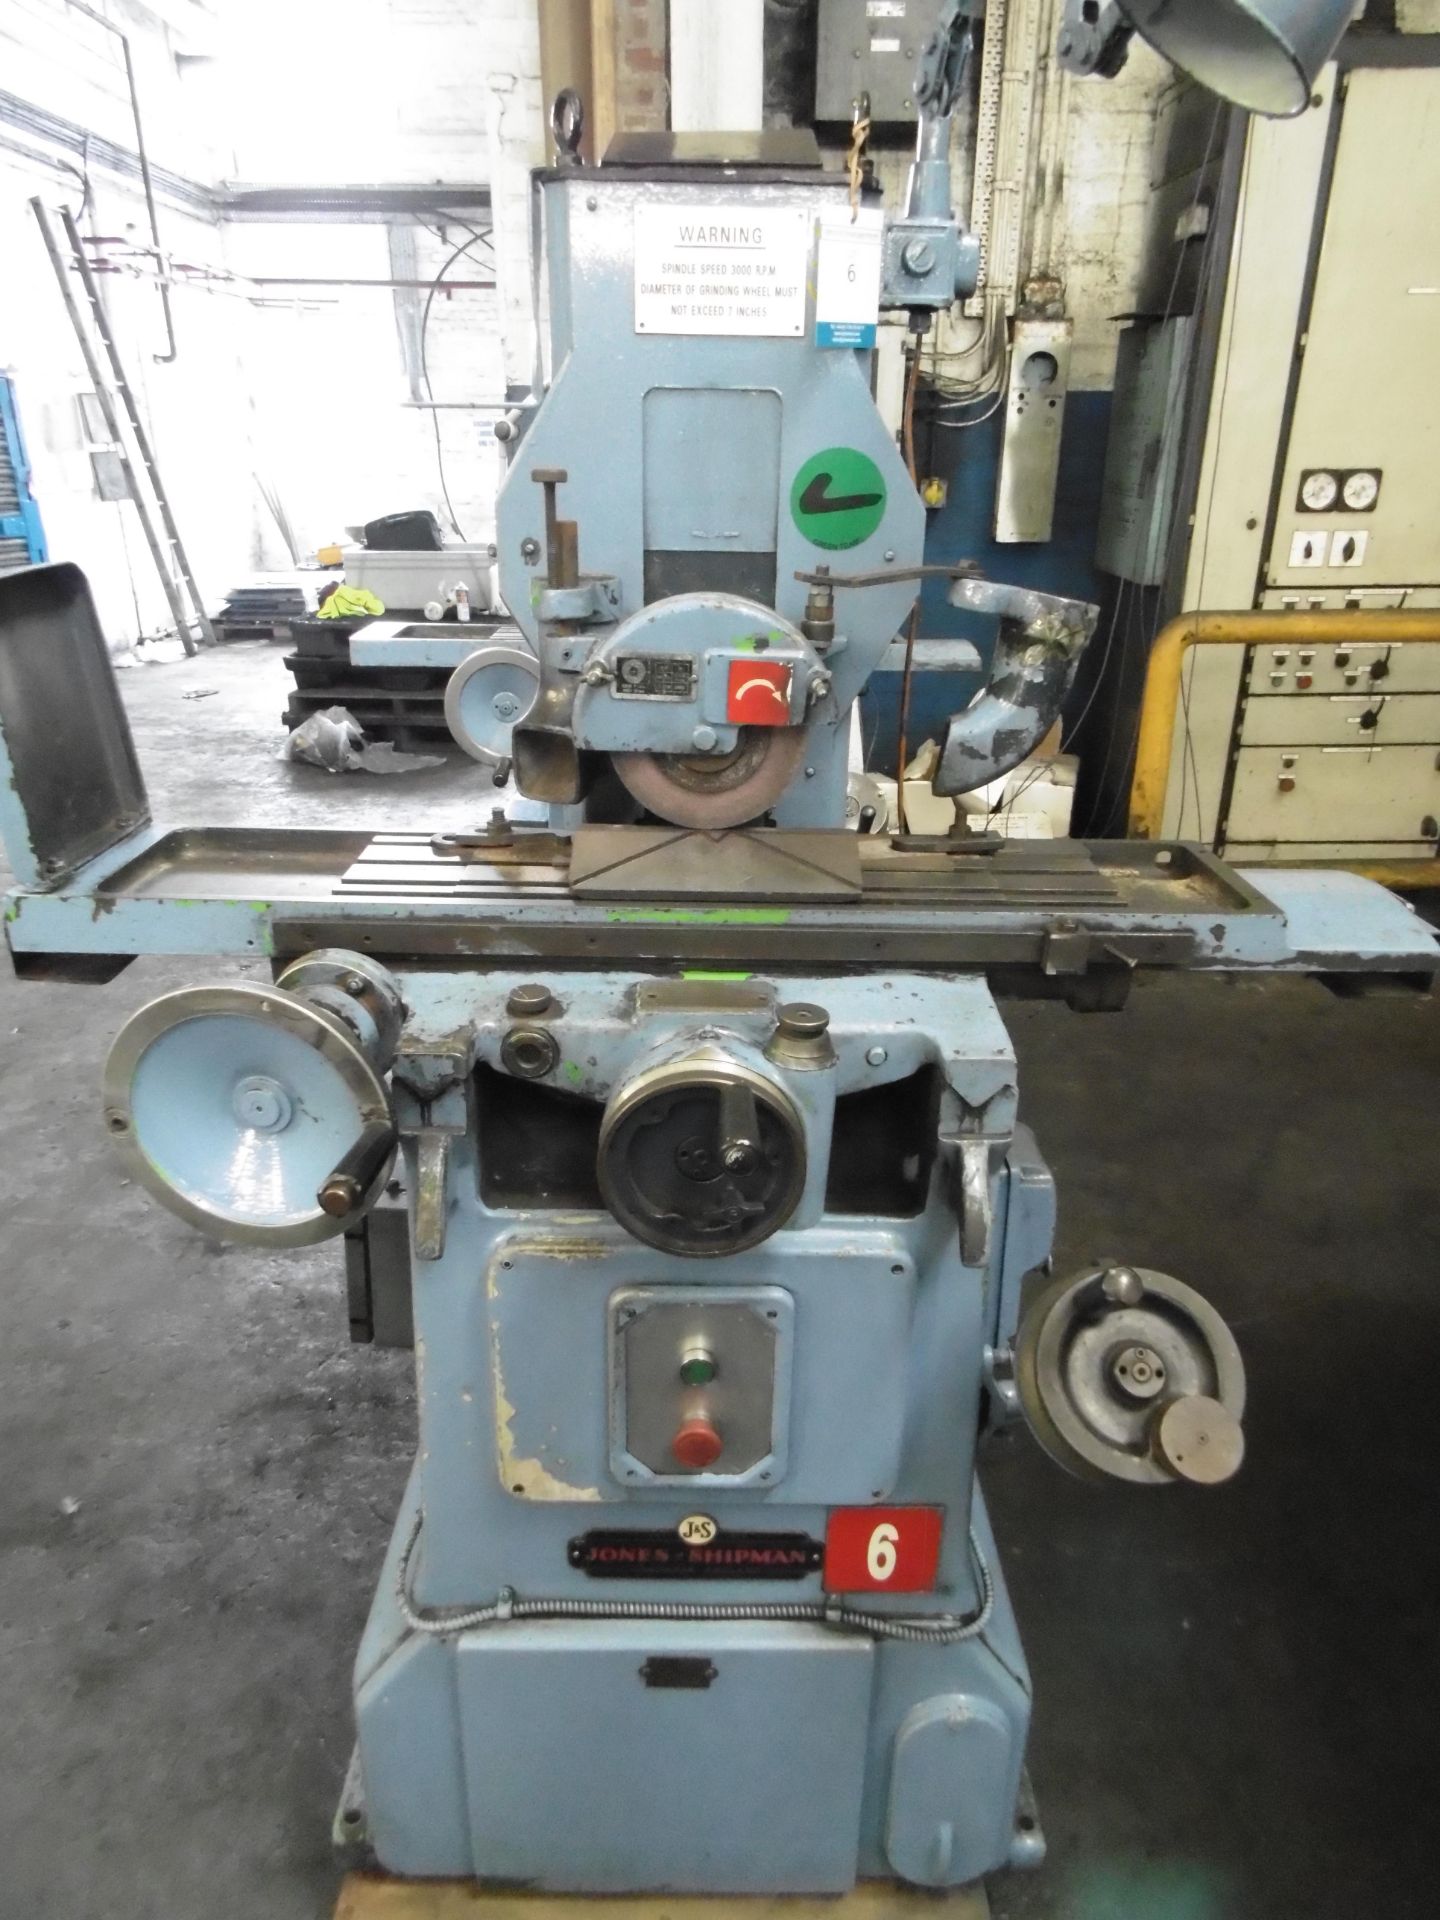 * Jones and Shipman Model 540 Surface Grinder; 3 Phase; 3000 RPM Spindle Speed; Max Grinding Wheel